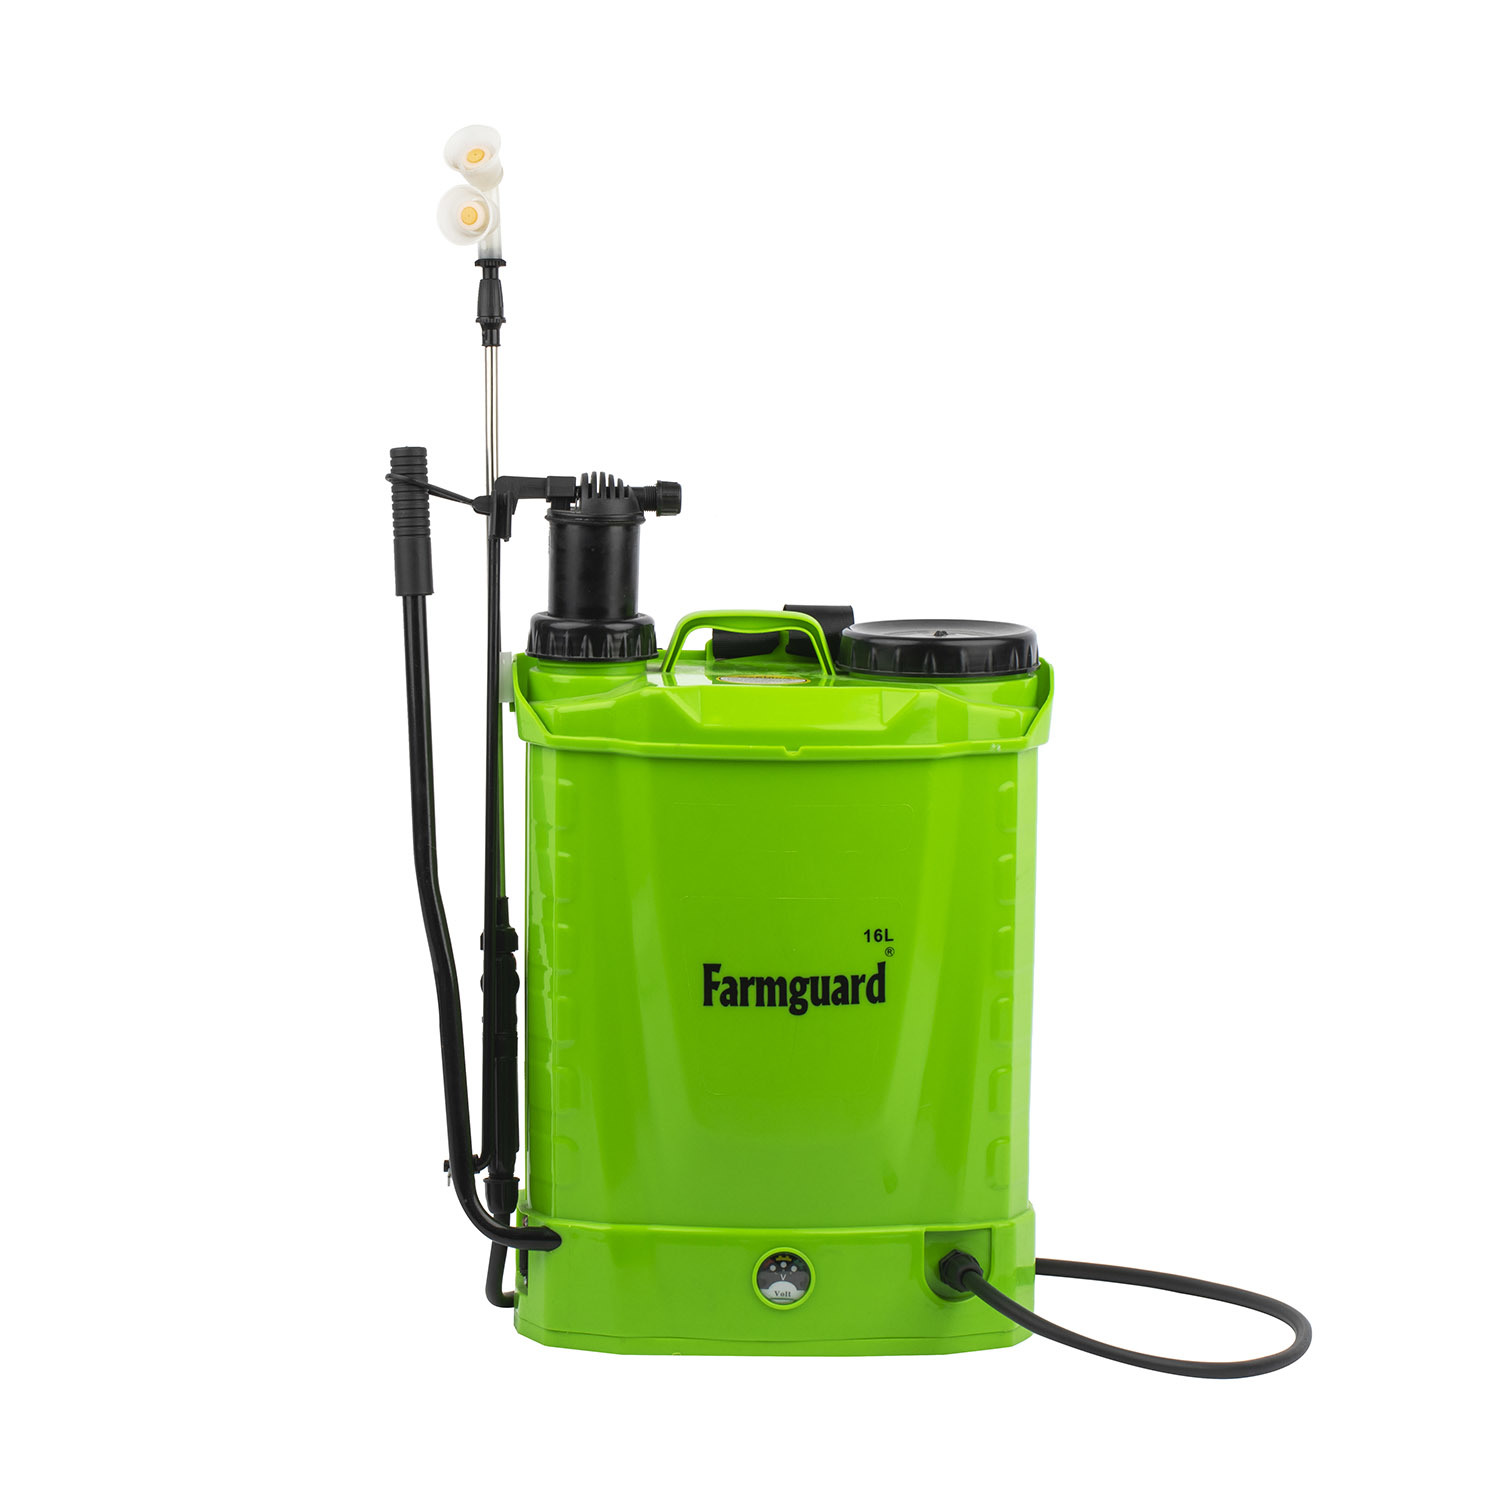 18L 20L 12 Volt Agriculture in 1 Electric Hand Knapsack Sprayer Pump GF-16SD-18z - Buy 12Volt battery and hand sprayer, Battery and Manual 2 in 1 sprayer, 2 in 1 agriculture